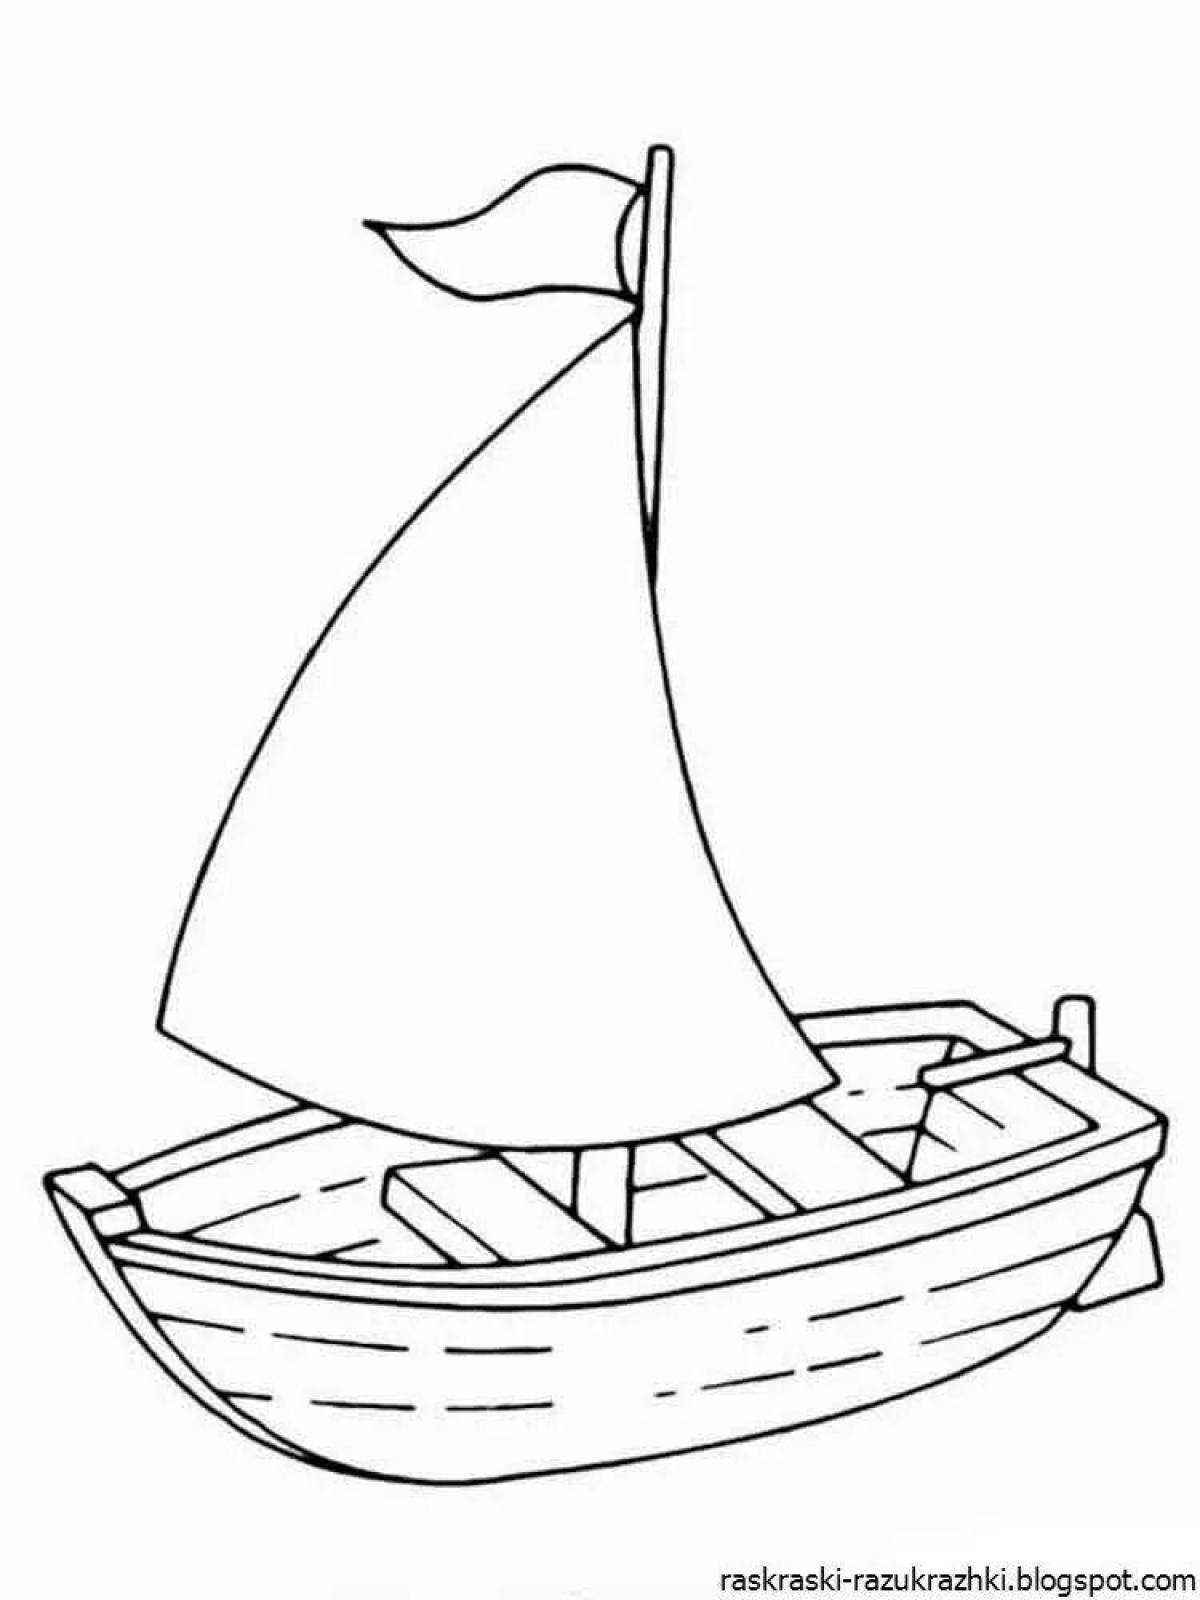 Exquisite boat coloring for kids